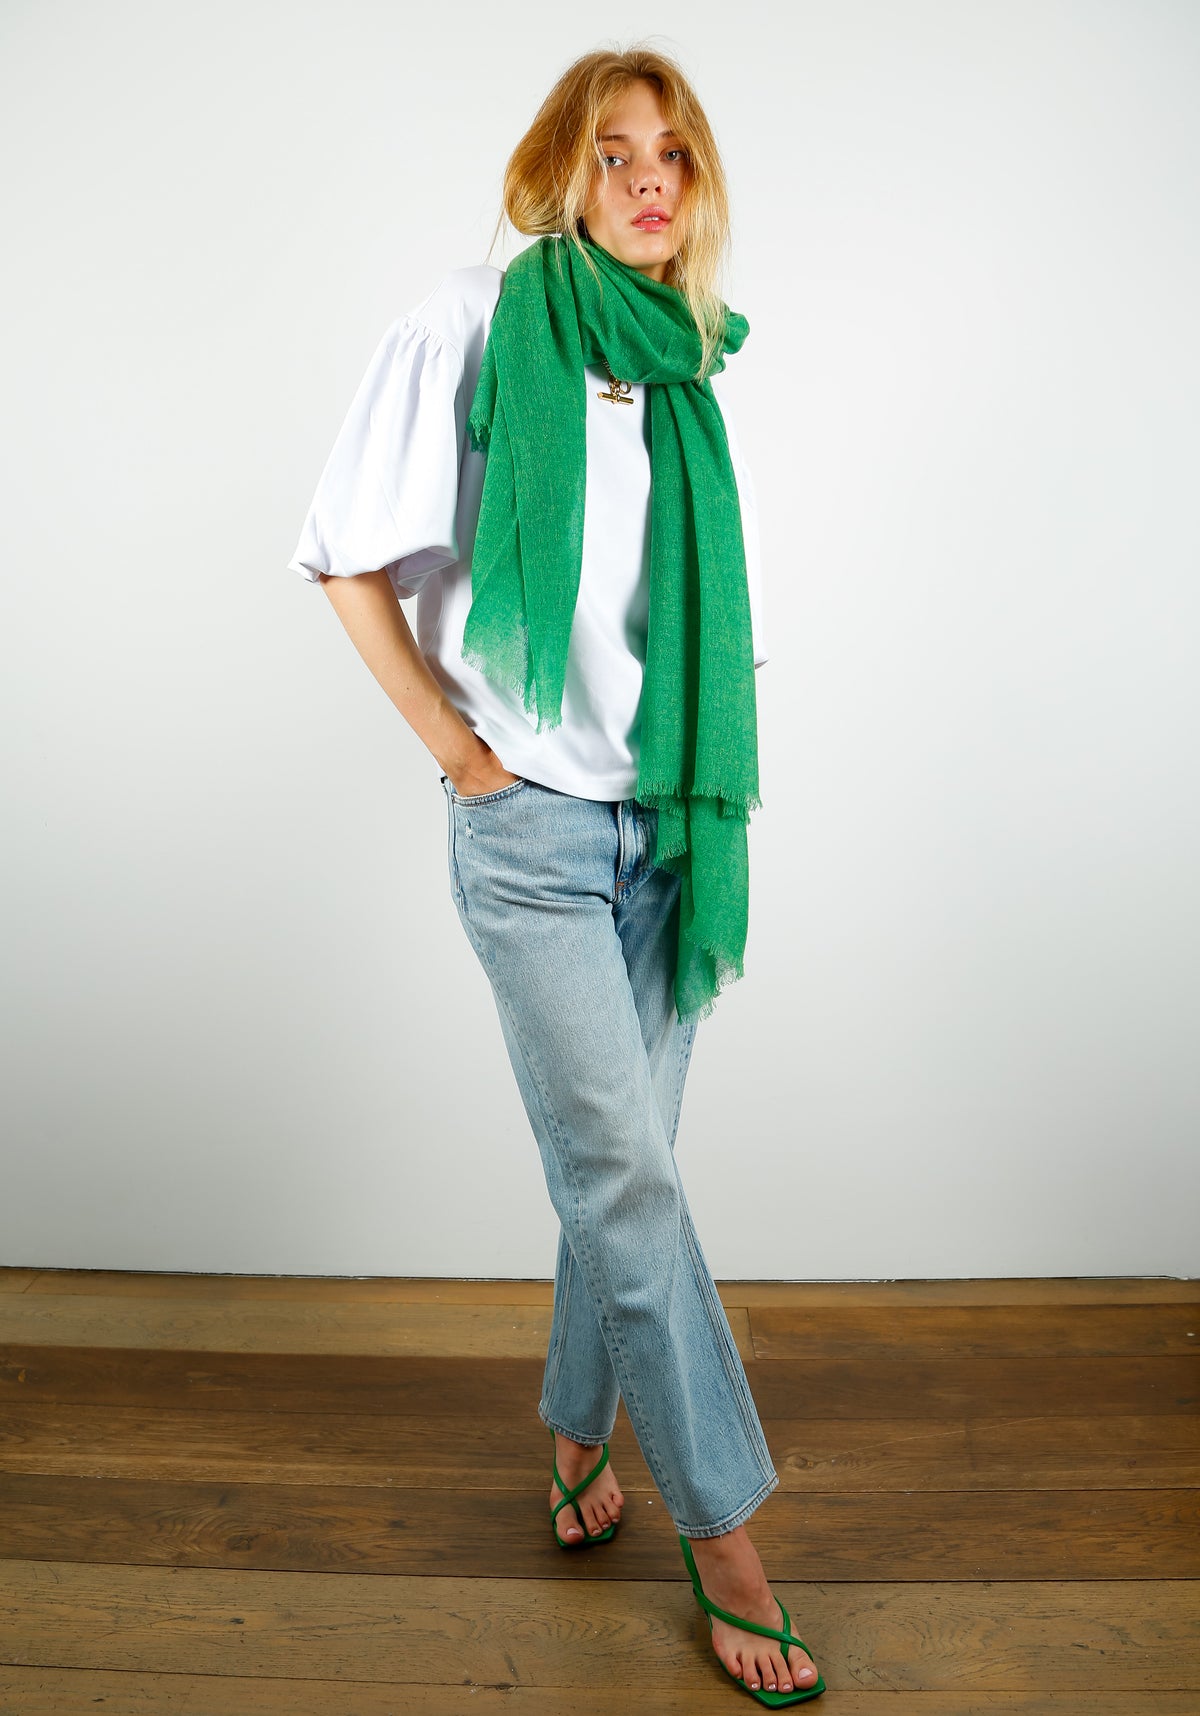 CALEIDO Cashmere Gauze Scarf in Kelly Green